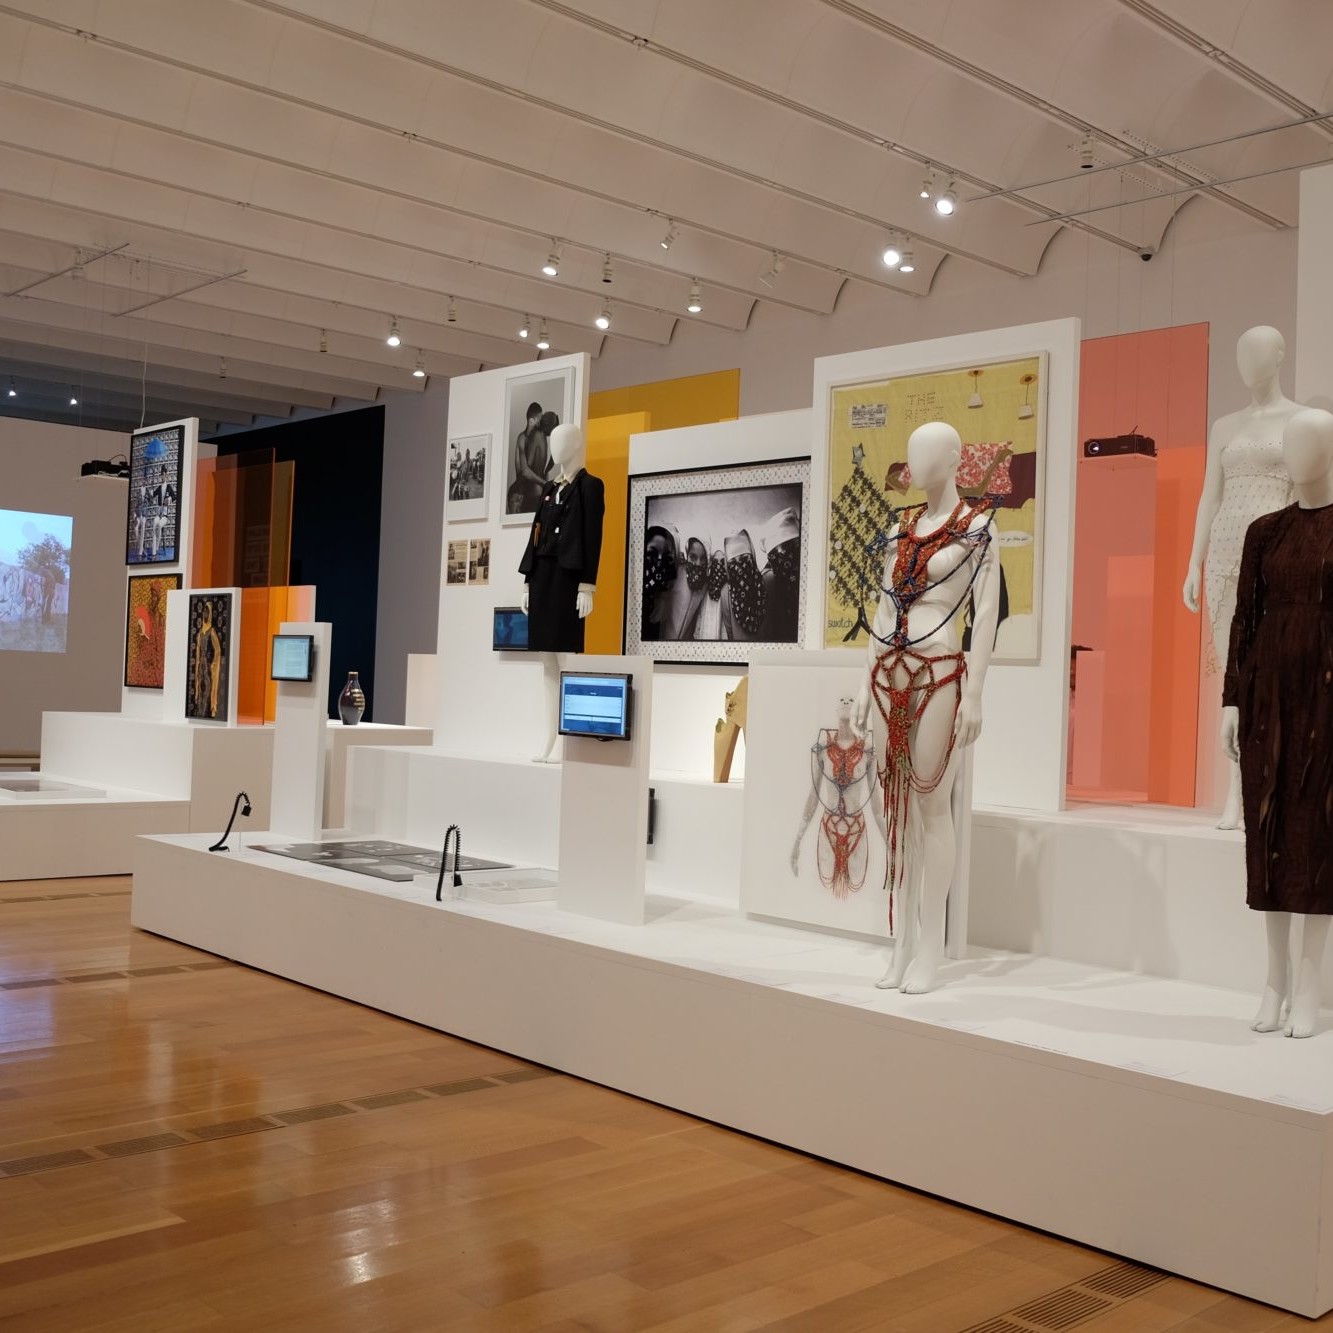 Mannequins wear various fashion designs in a large gallery with wood panel floors